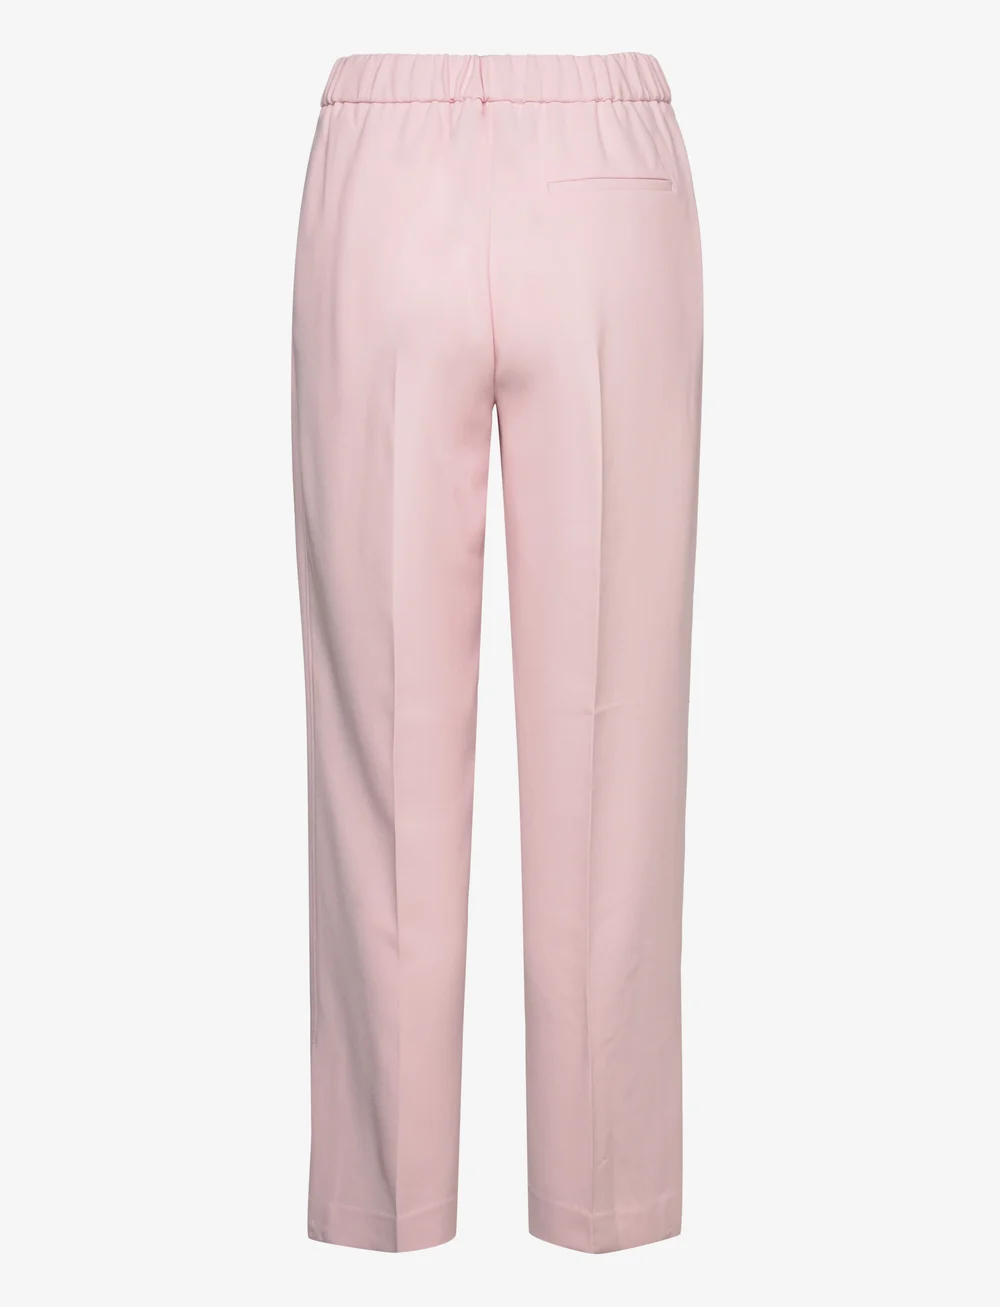 Women's Pink Trousers  Pink Cargo & Tapered Trousers - Reiss Australia